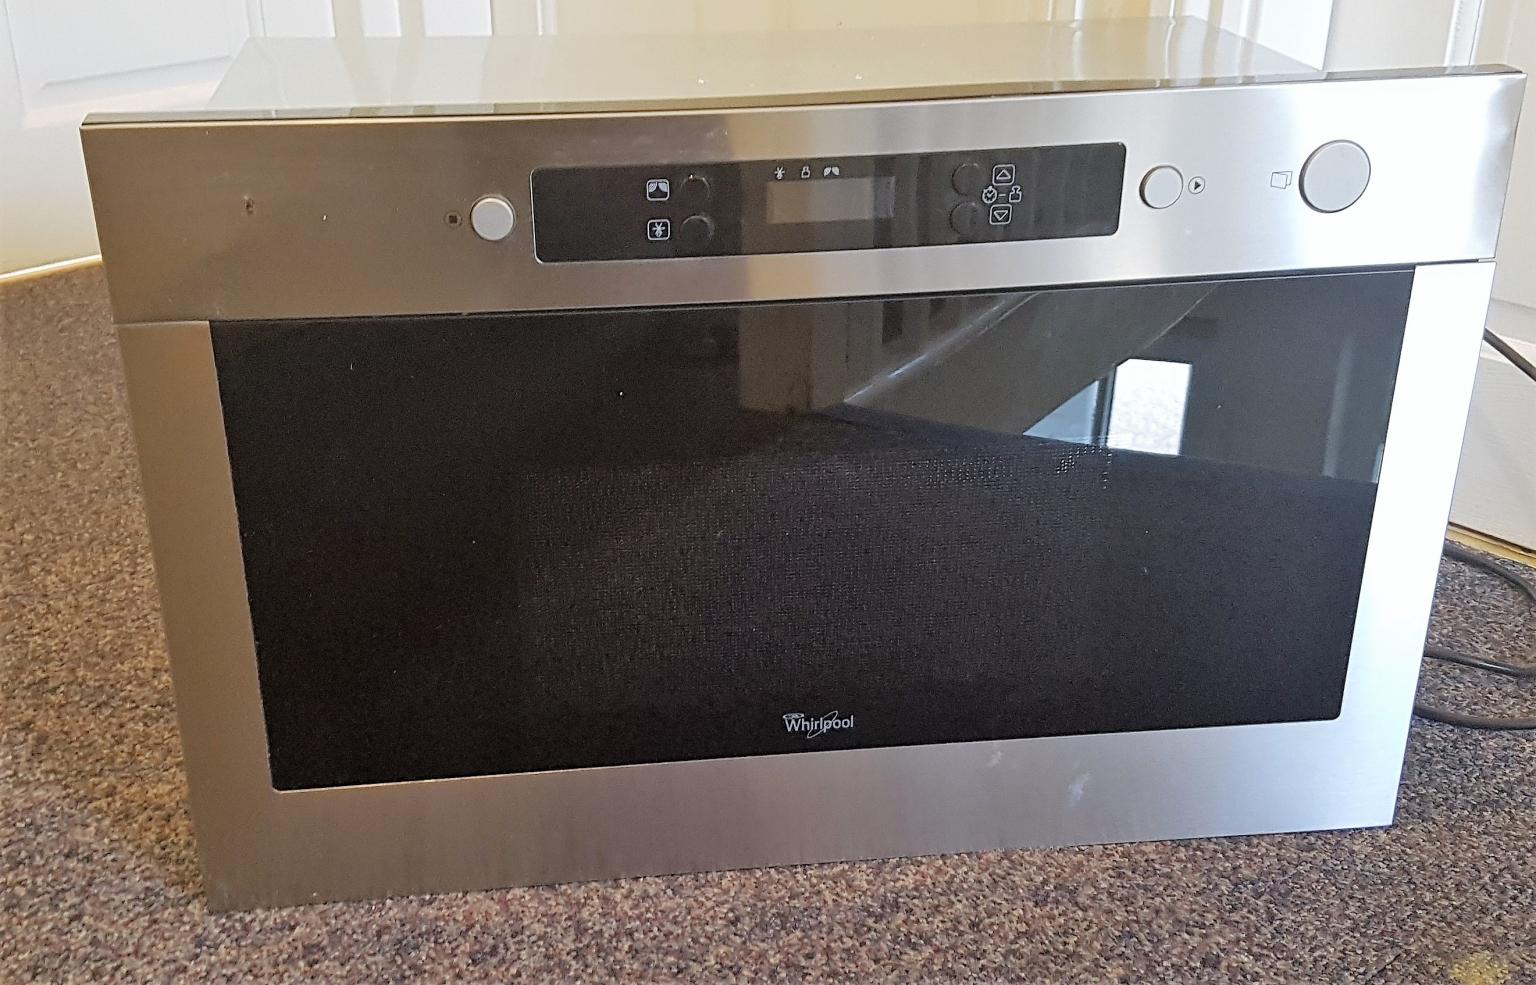 Whirlpool Built-in Microwave For Parts in TW8 London for £40.00 for